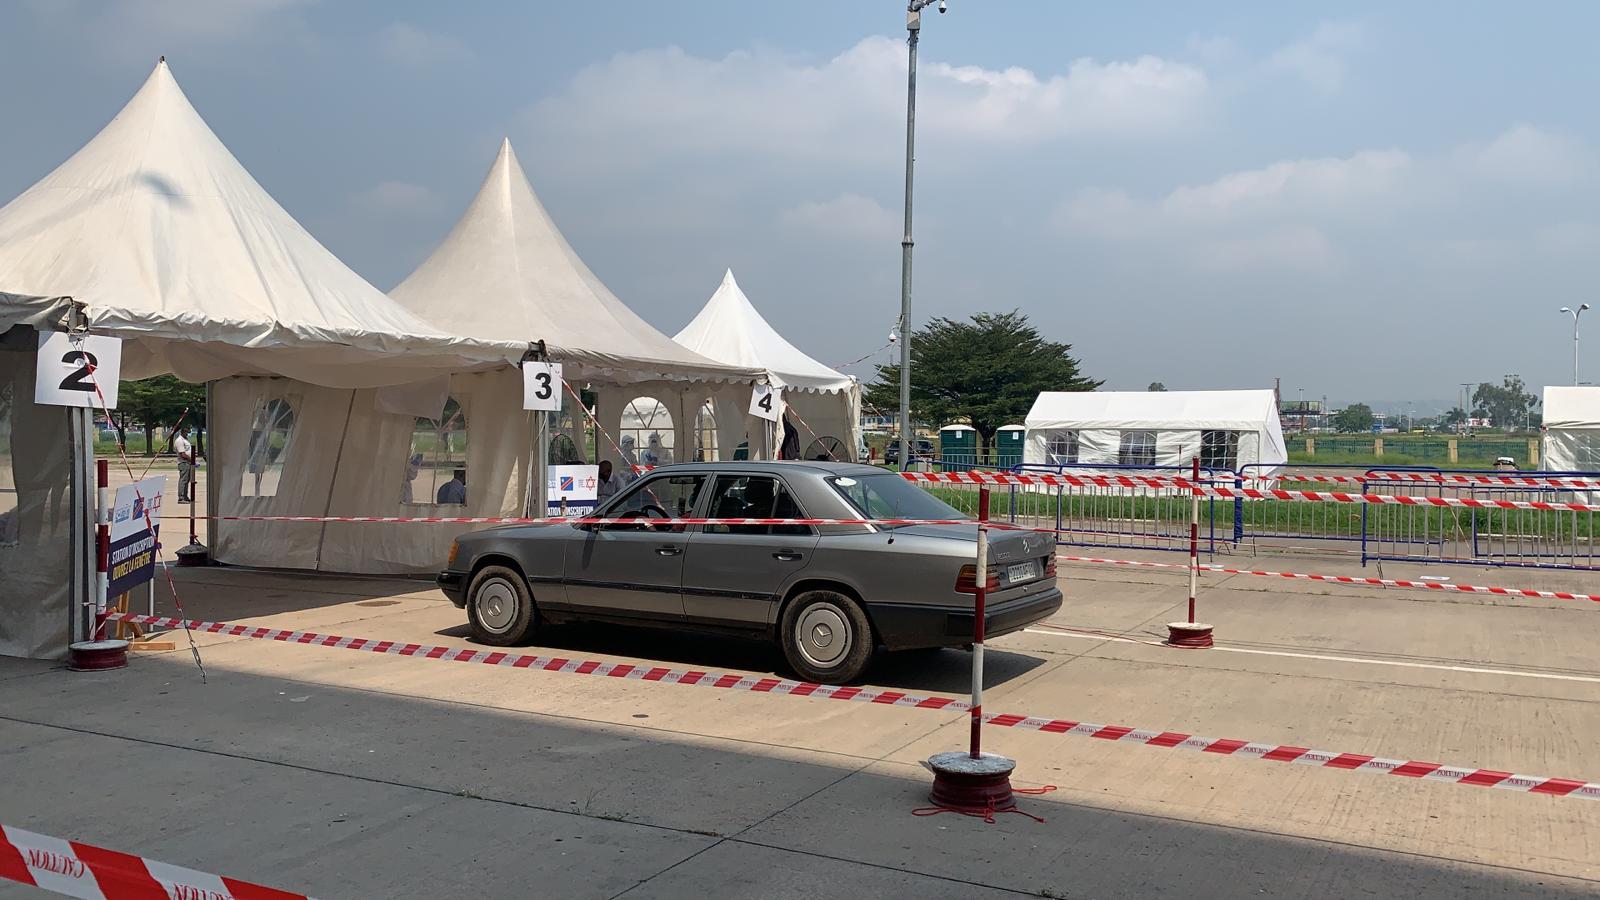 Israel’s Magen David Adom helped the Congo set up a Covid-19 drive-through testing center, complete with software and training. Photo: courtesy